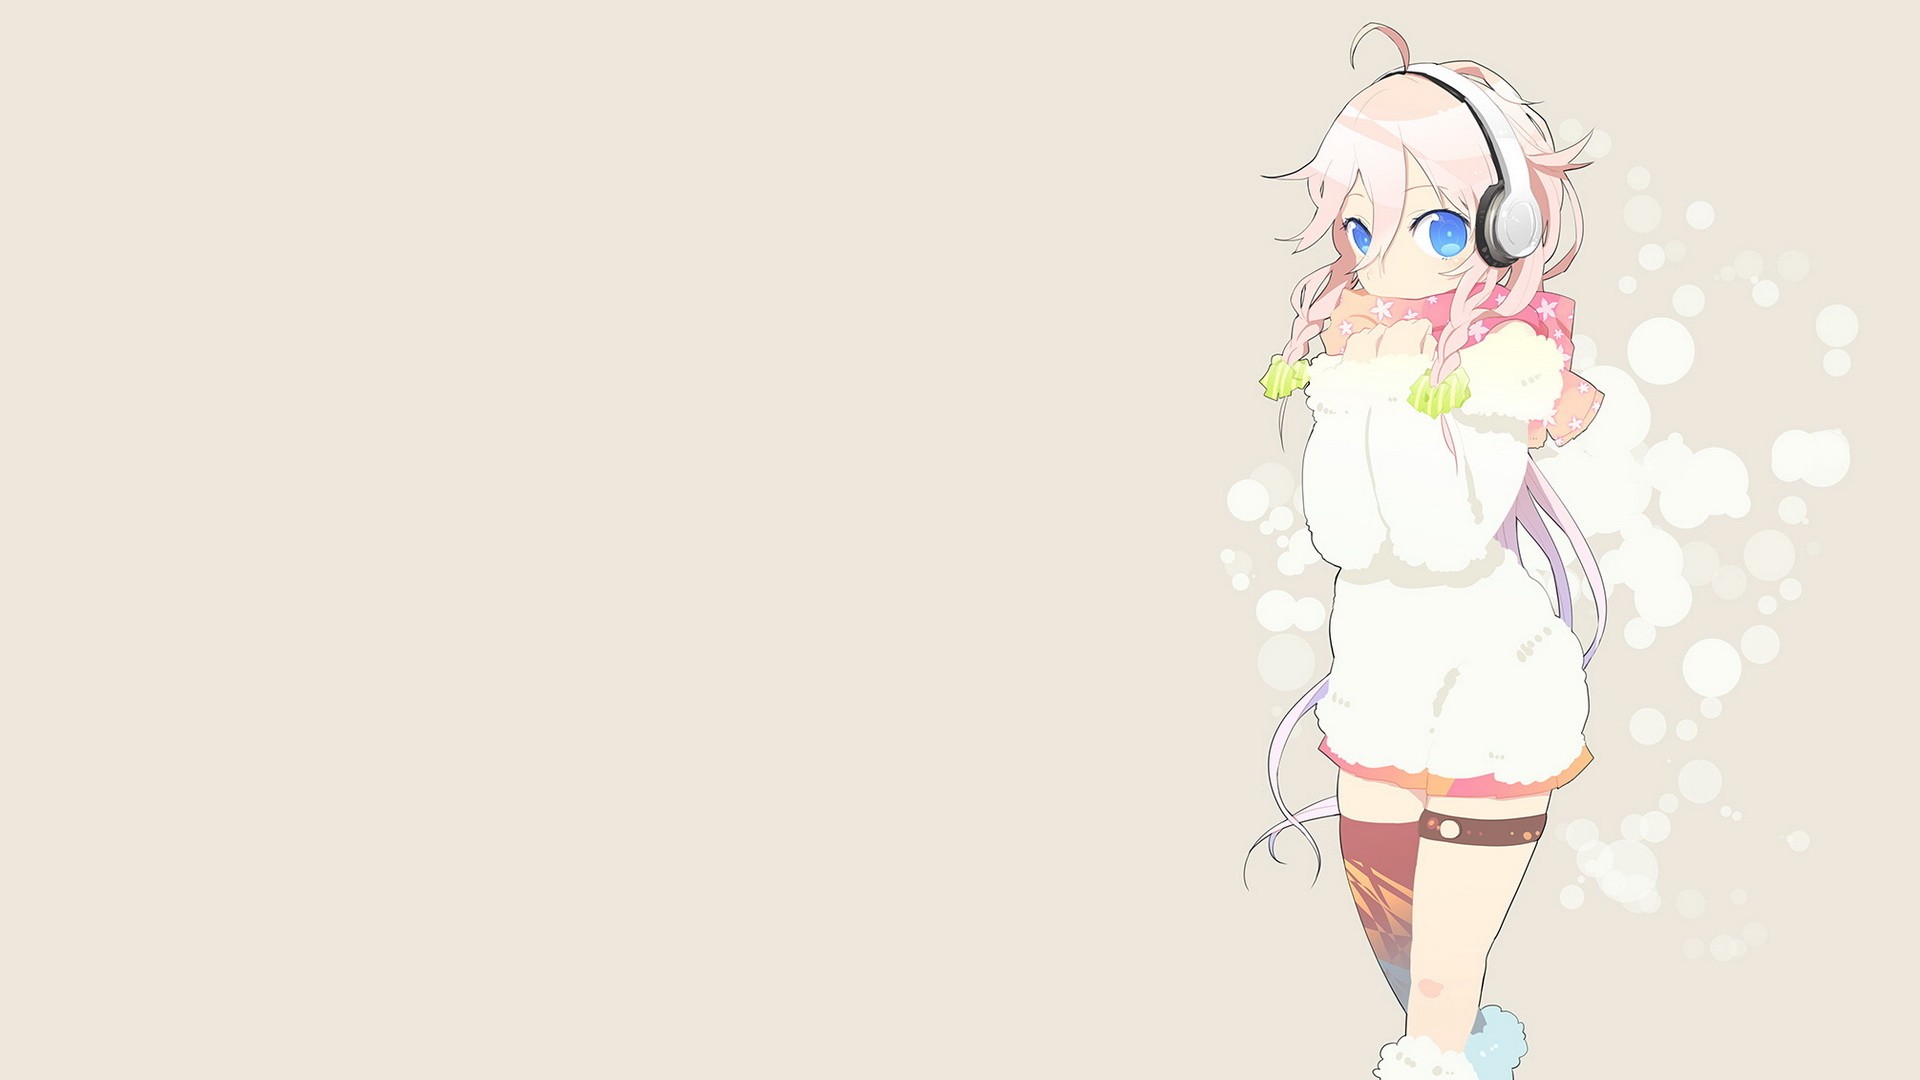 headphones, Boots, Winter, Vocaloid, Blue, Eyes, Skirts, Long, Hair, Thigh, Highs, Braids, Scarfs, White, Hair, Ahoge, Simple, Background, Hair, Ornaments, Garters, Bare, Shoulders, Sweaters Wallpaper